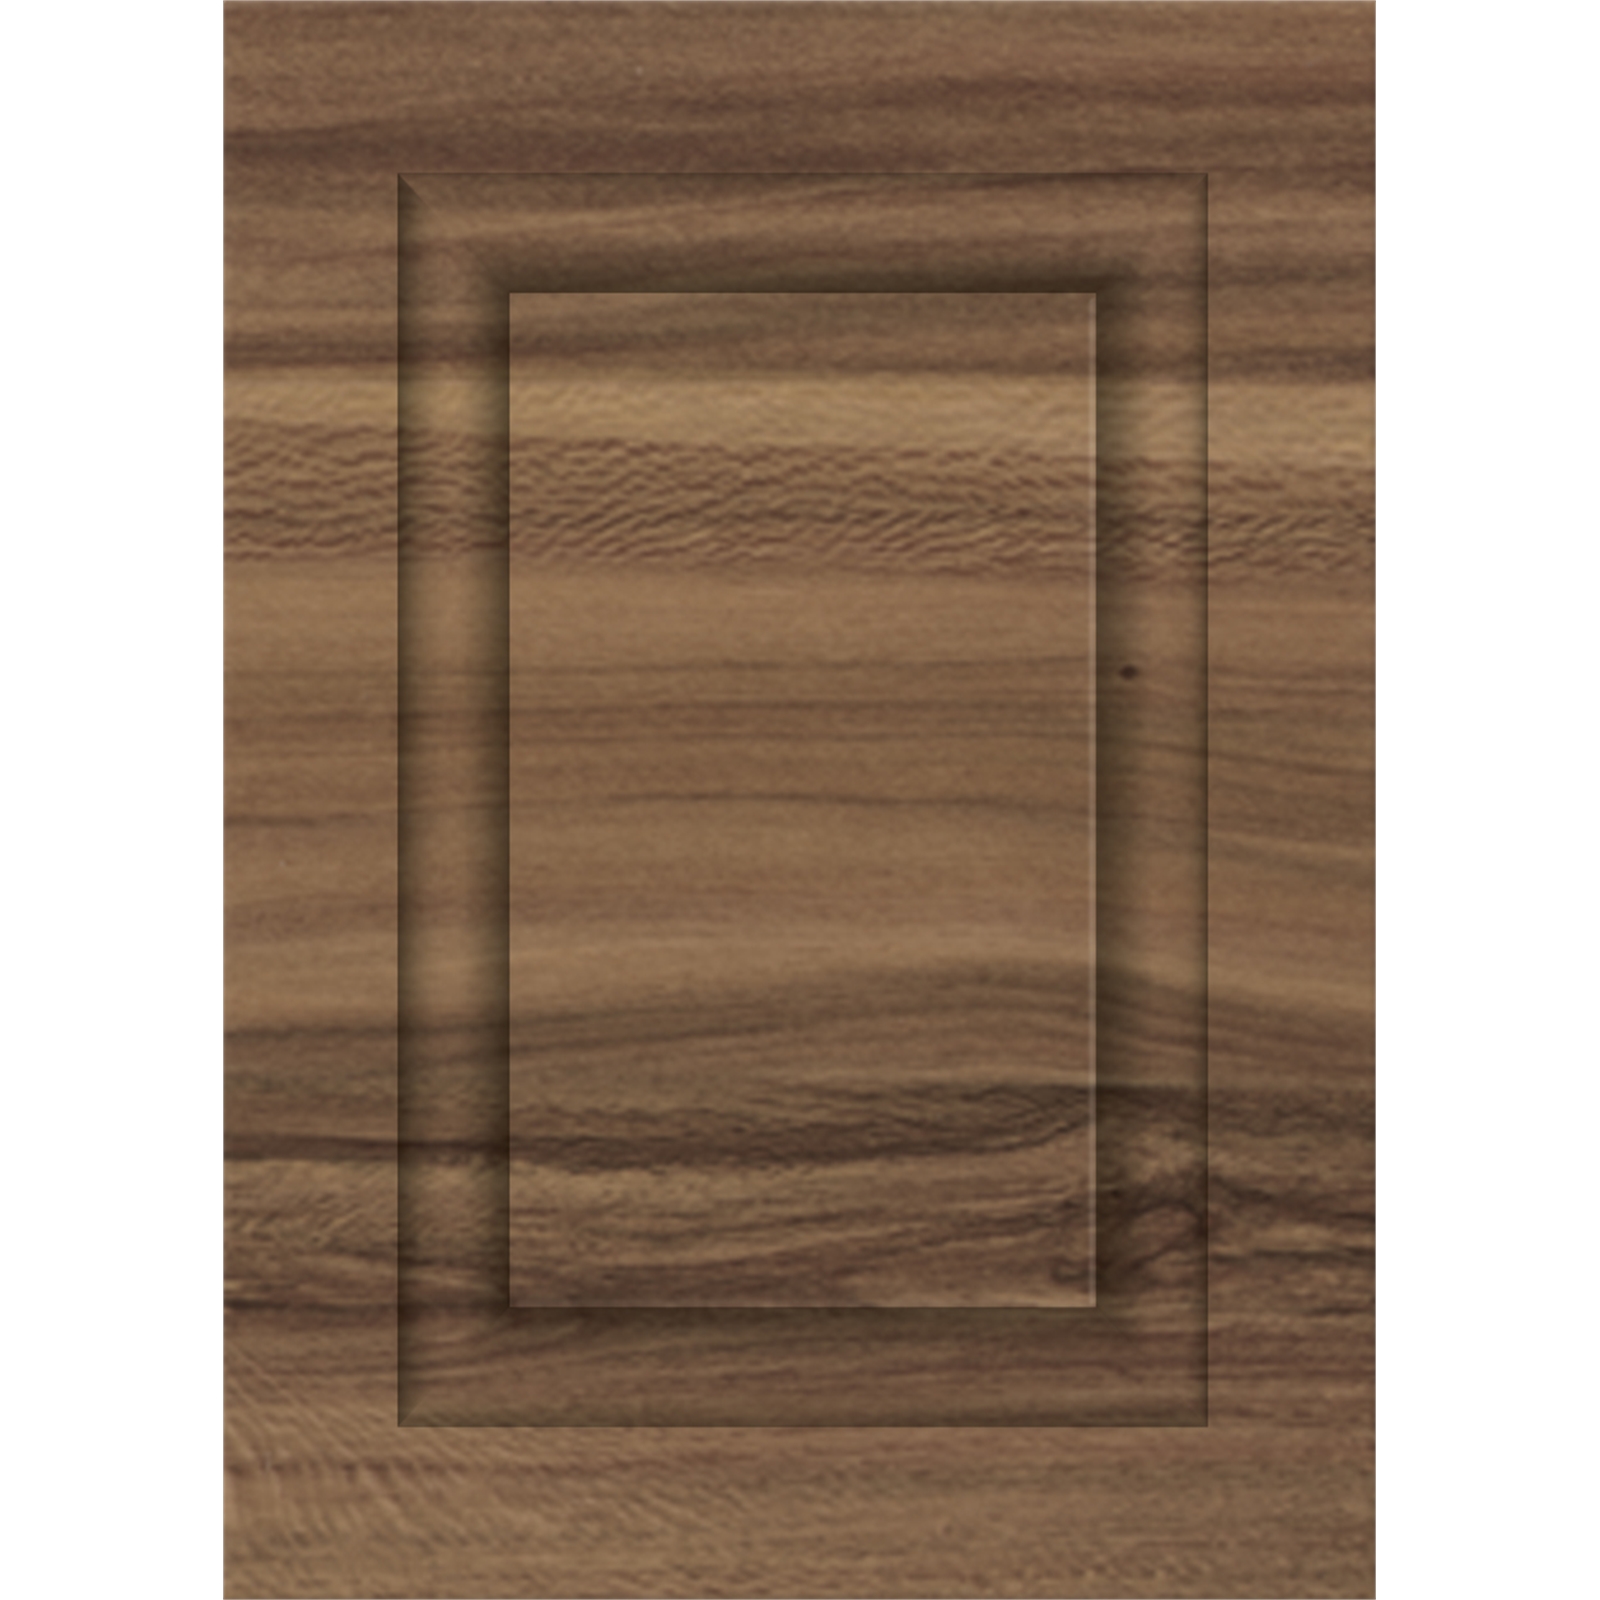 Kaboodle 600mm Outback Horizontal Heritage Cabinet Door